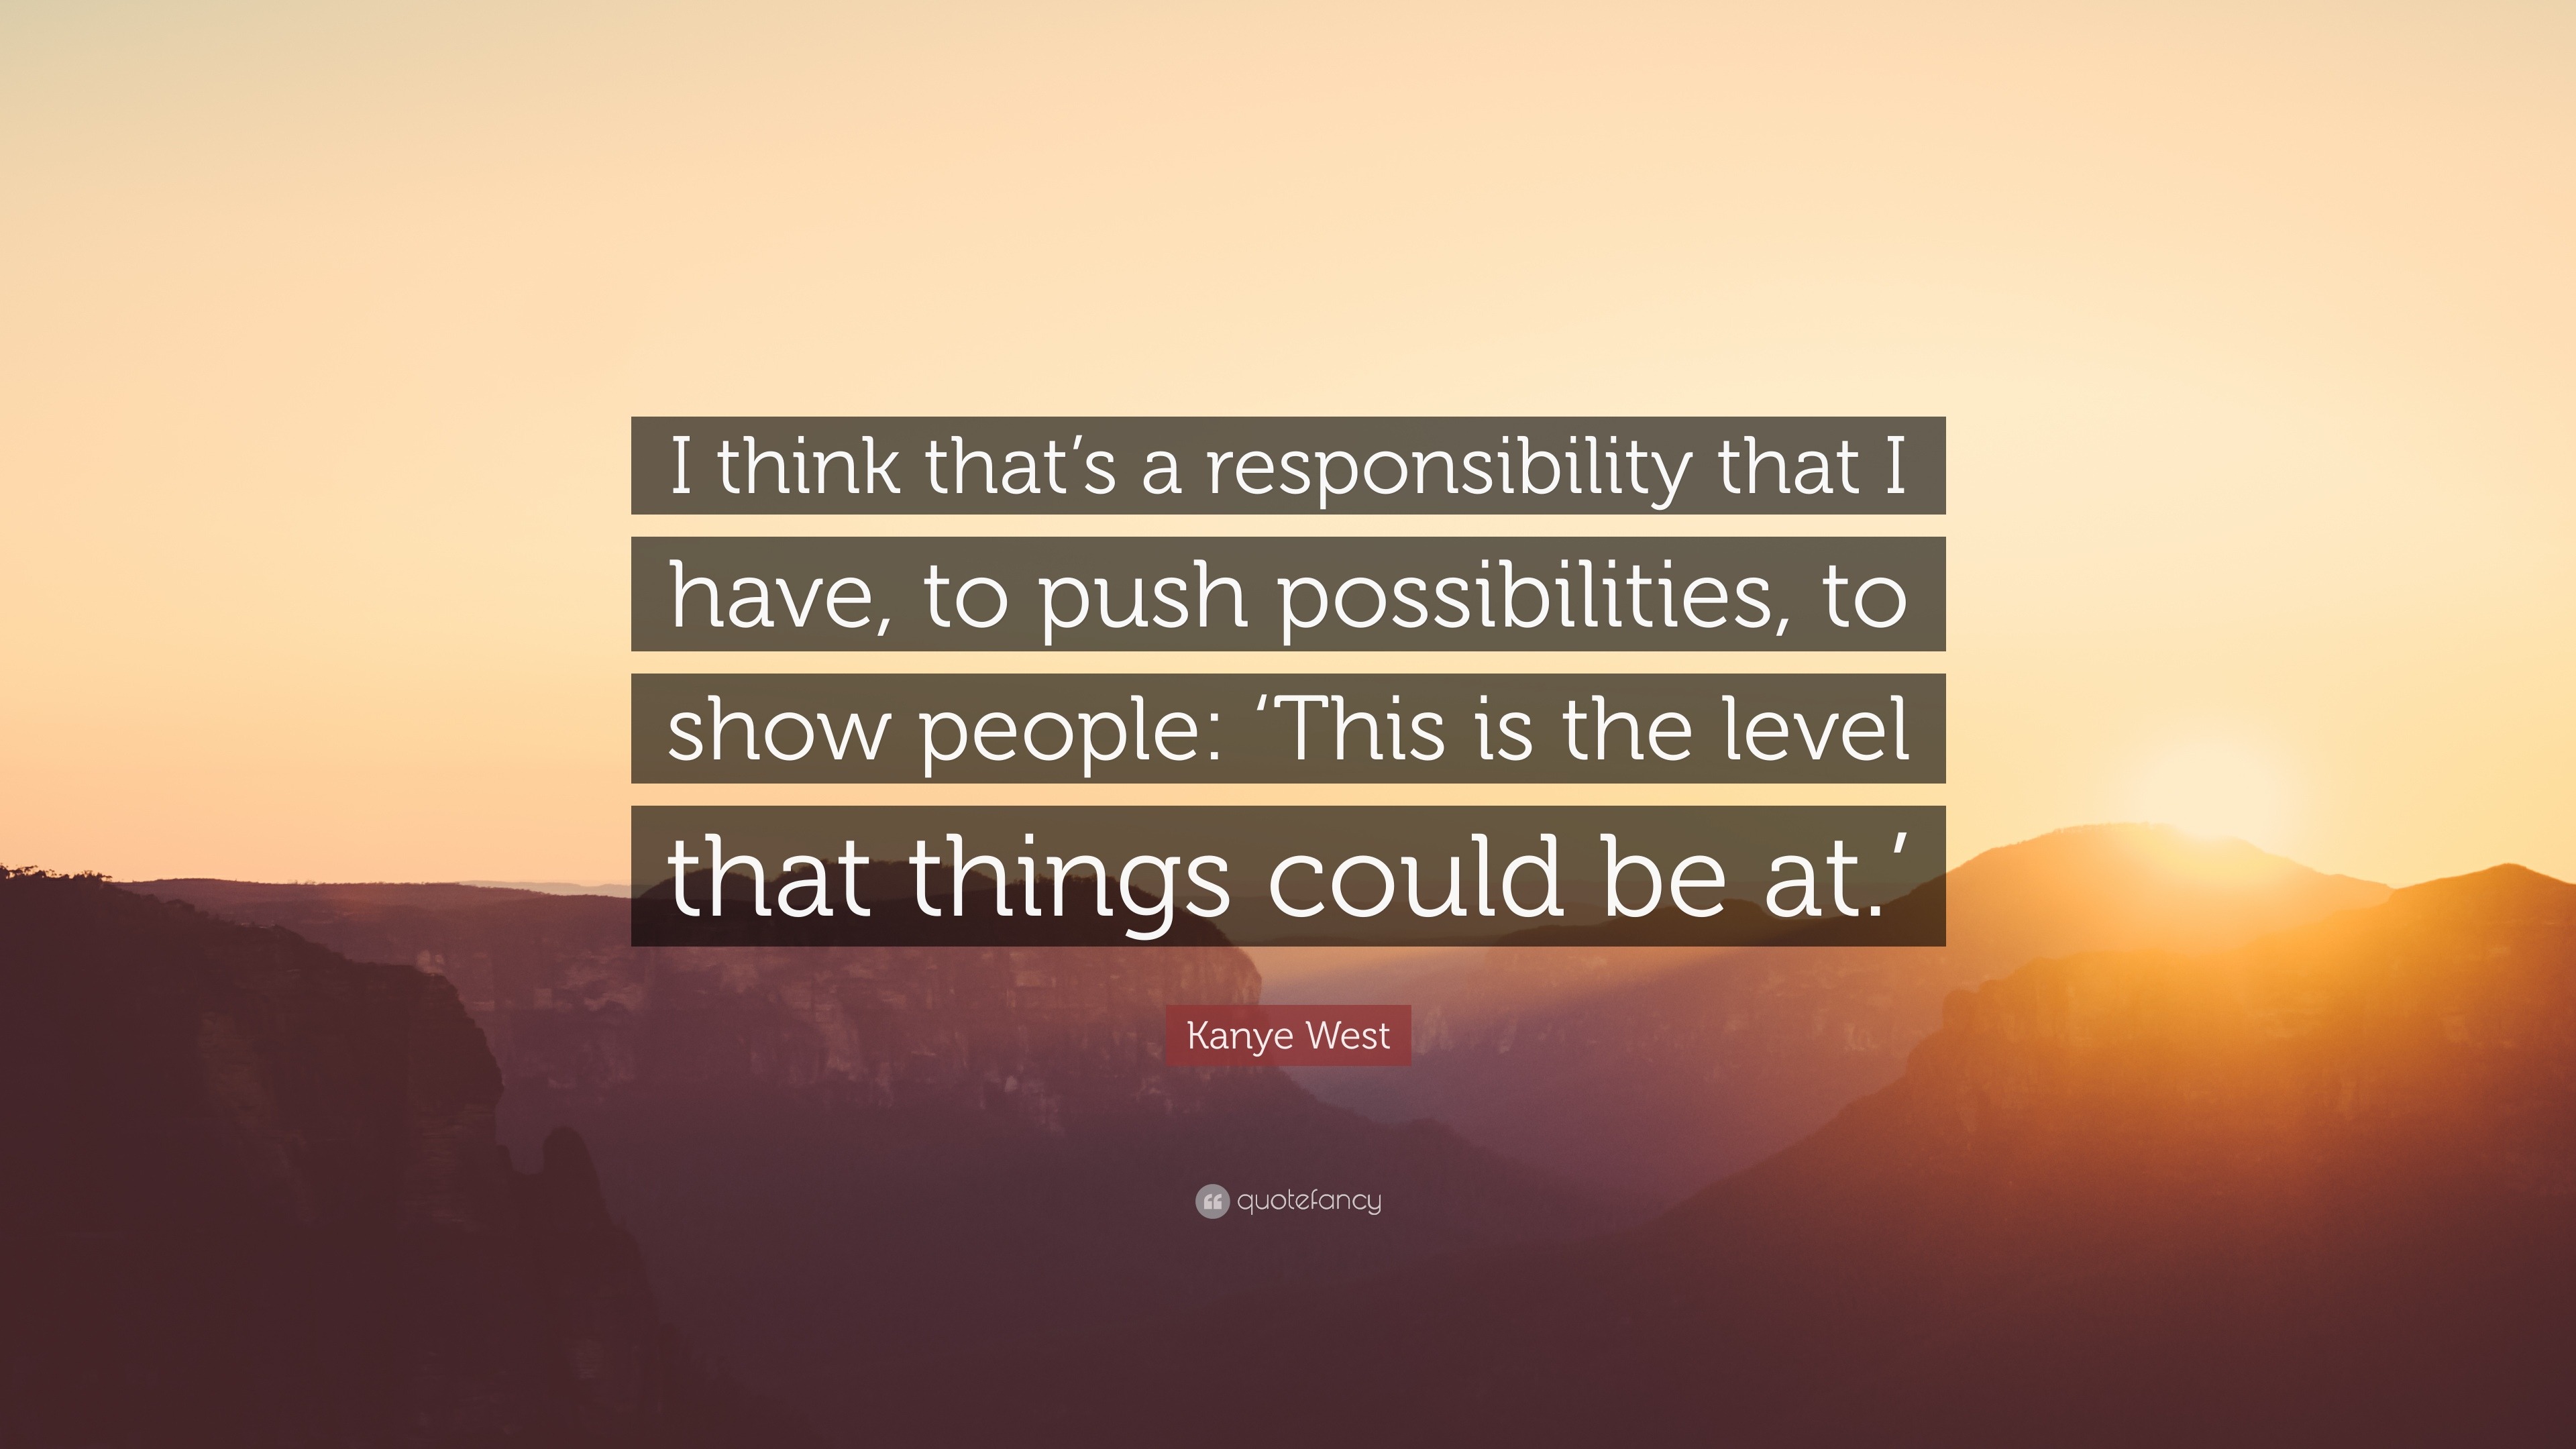 Kanye West Quote: “I think that's a responsibility that I have, to ...